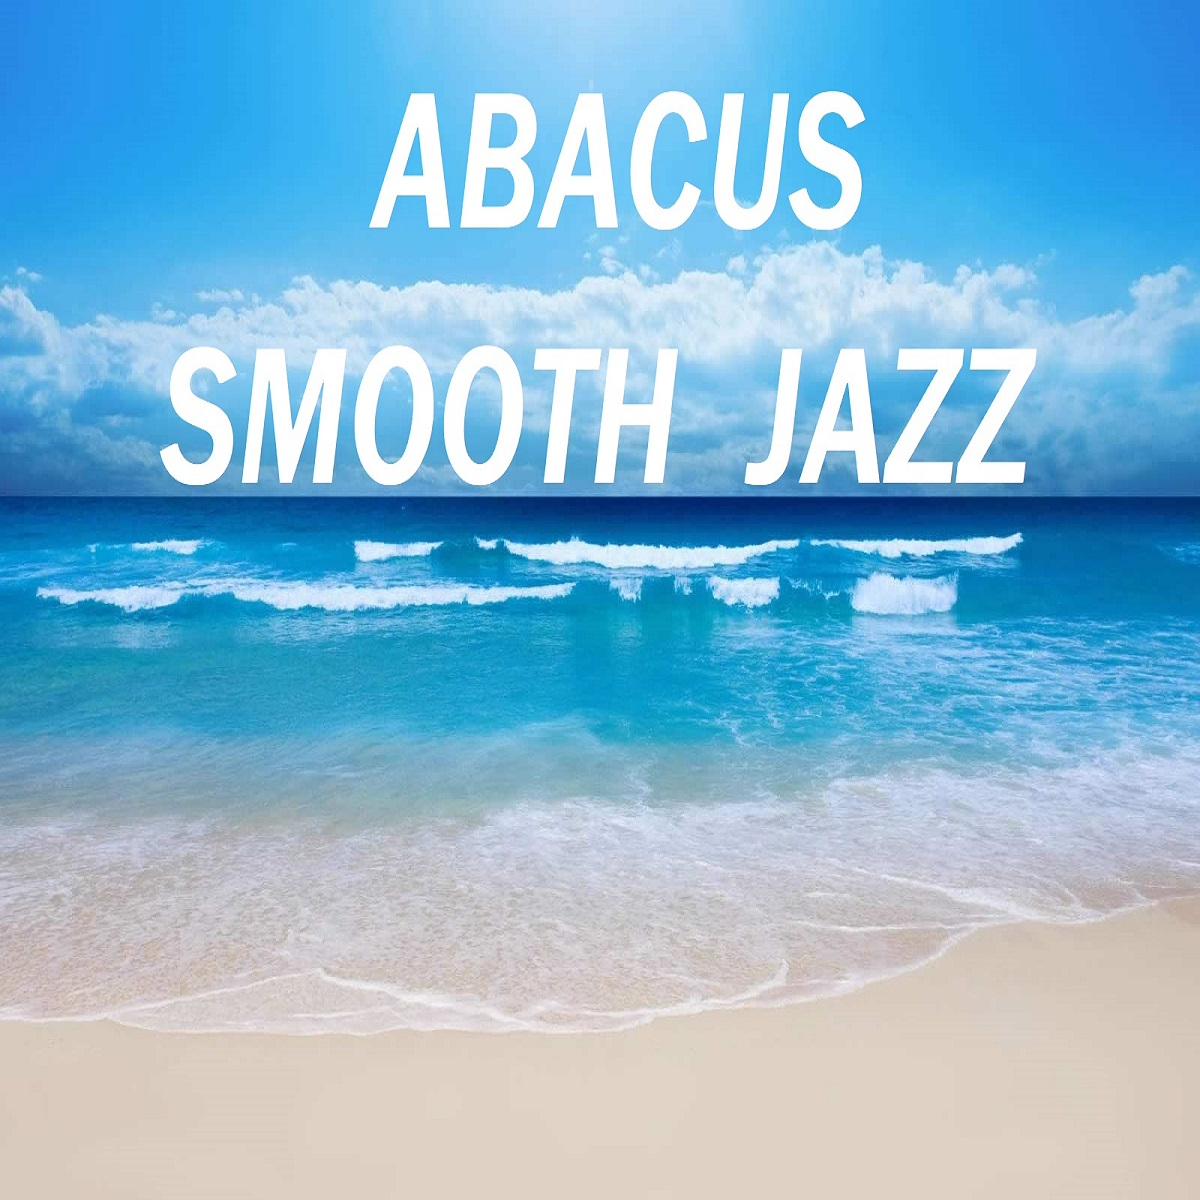 Abacus Smooth Jazz